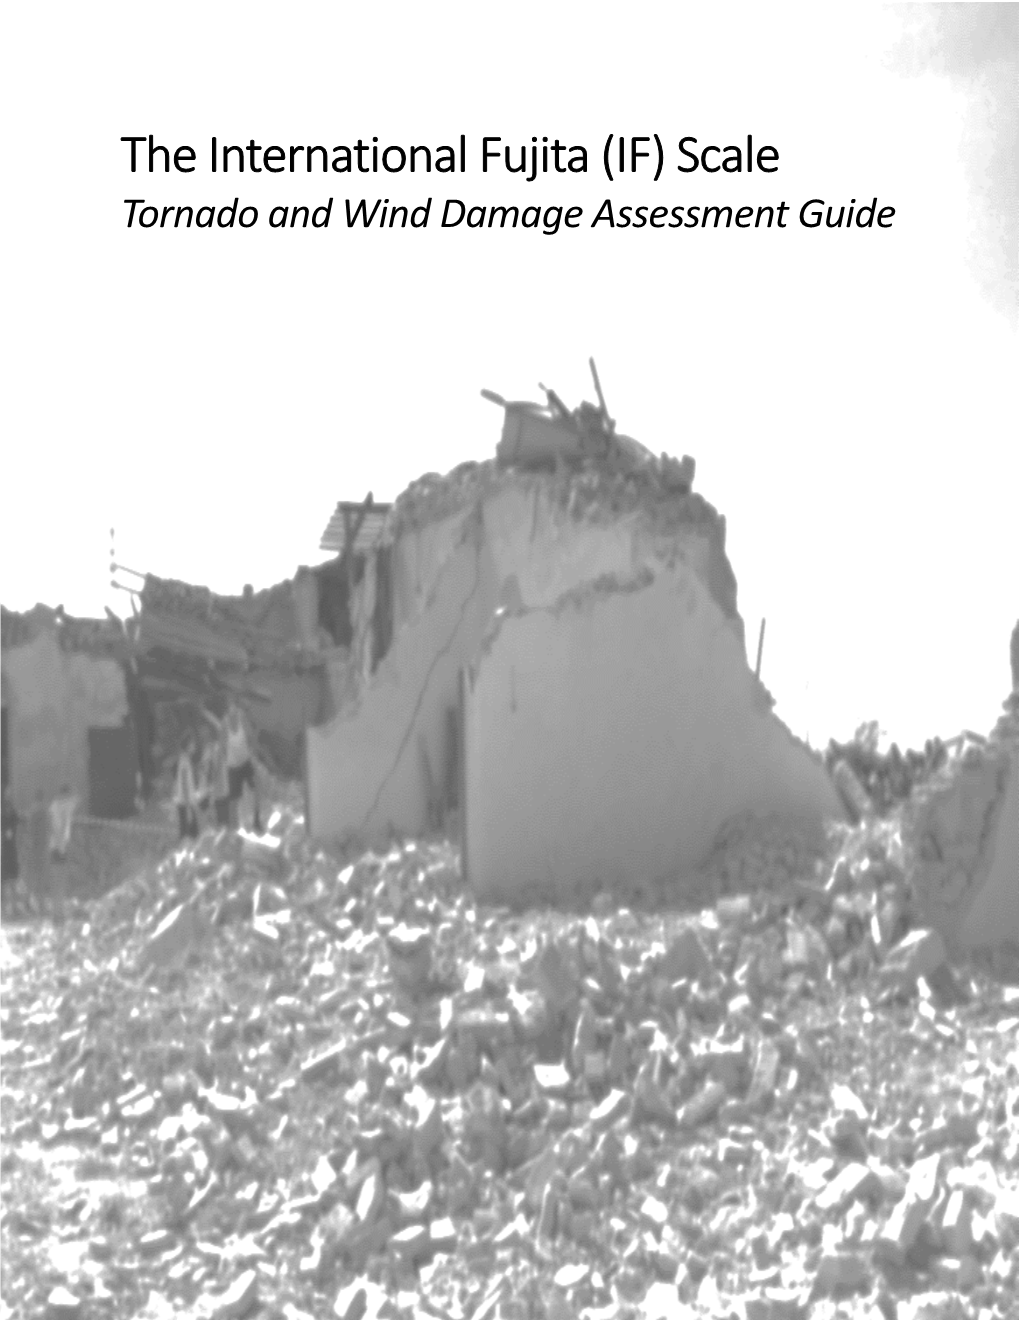 The International Fujita (IF) Scale Tornado and Wind Damage Assessment Guide